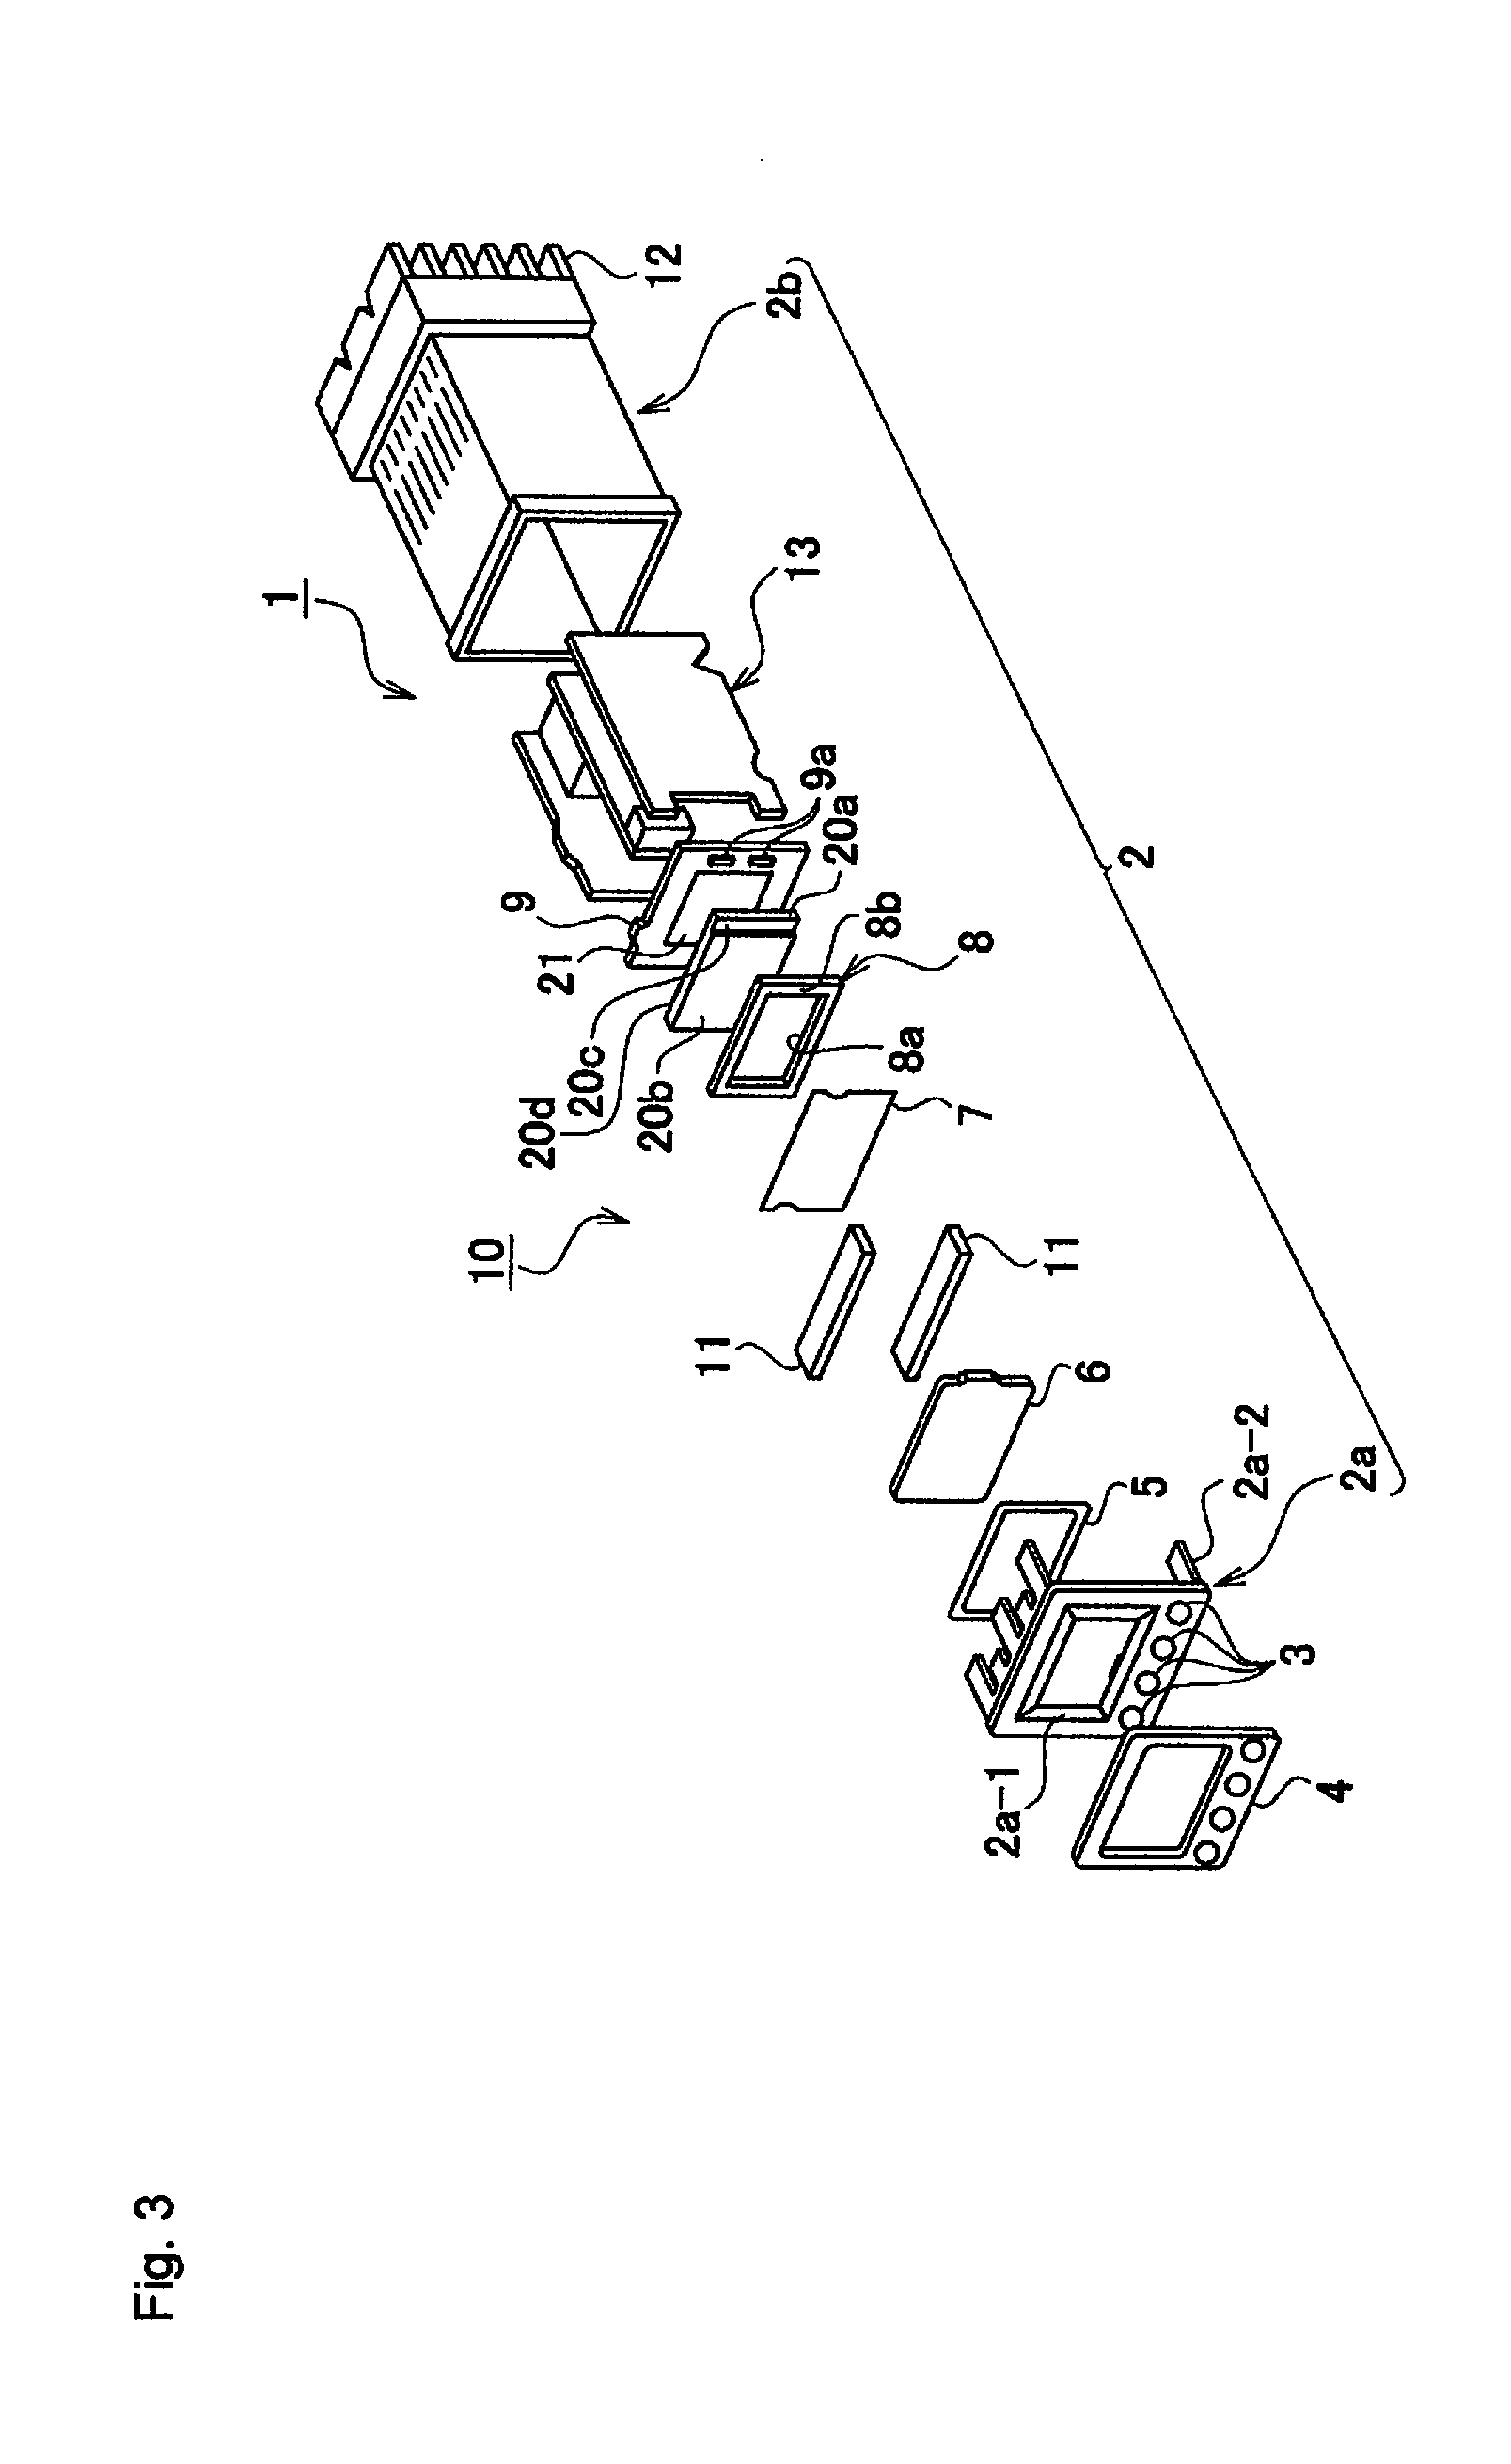 Electronic equipment provided with display portion